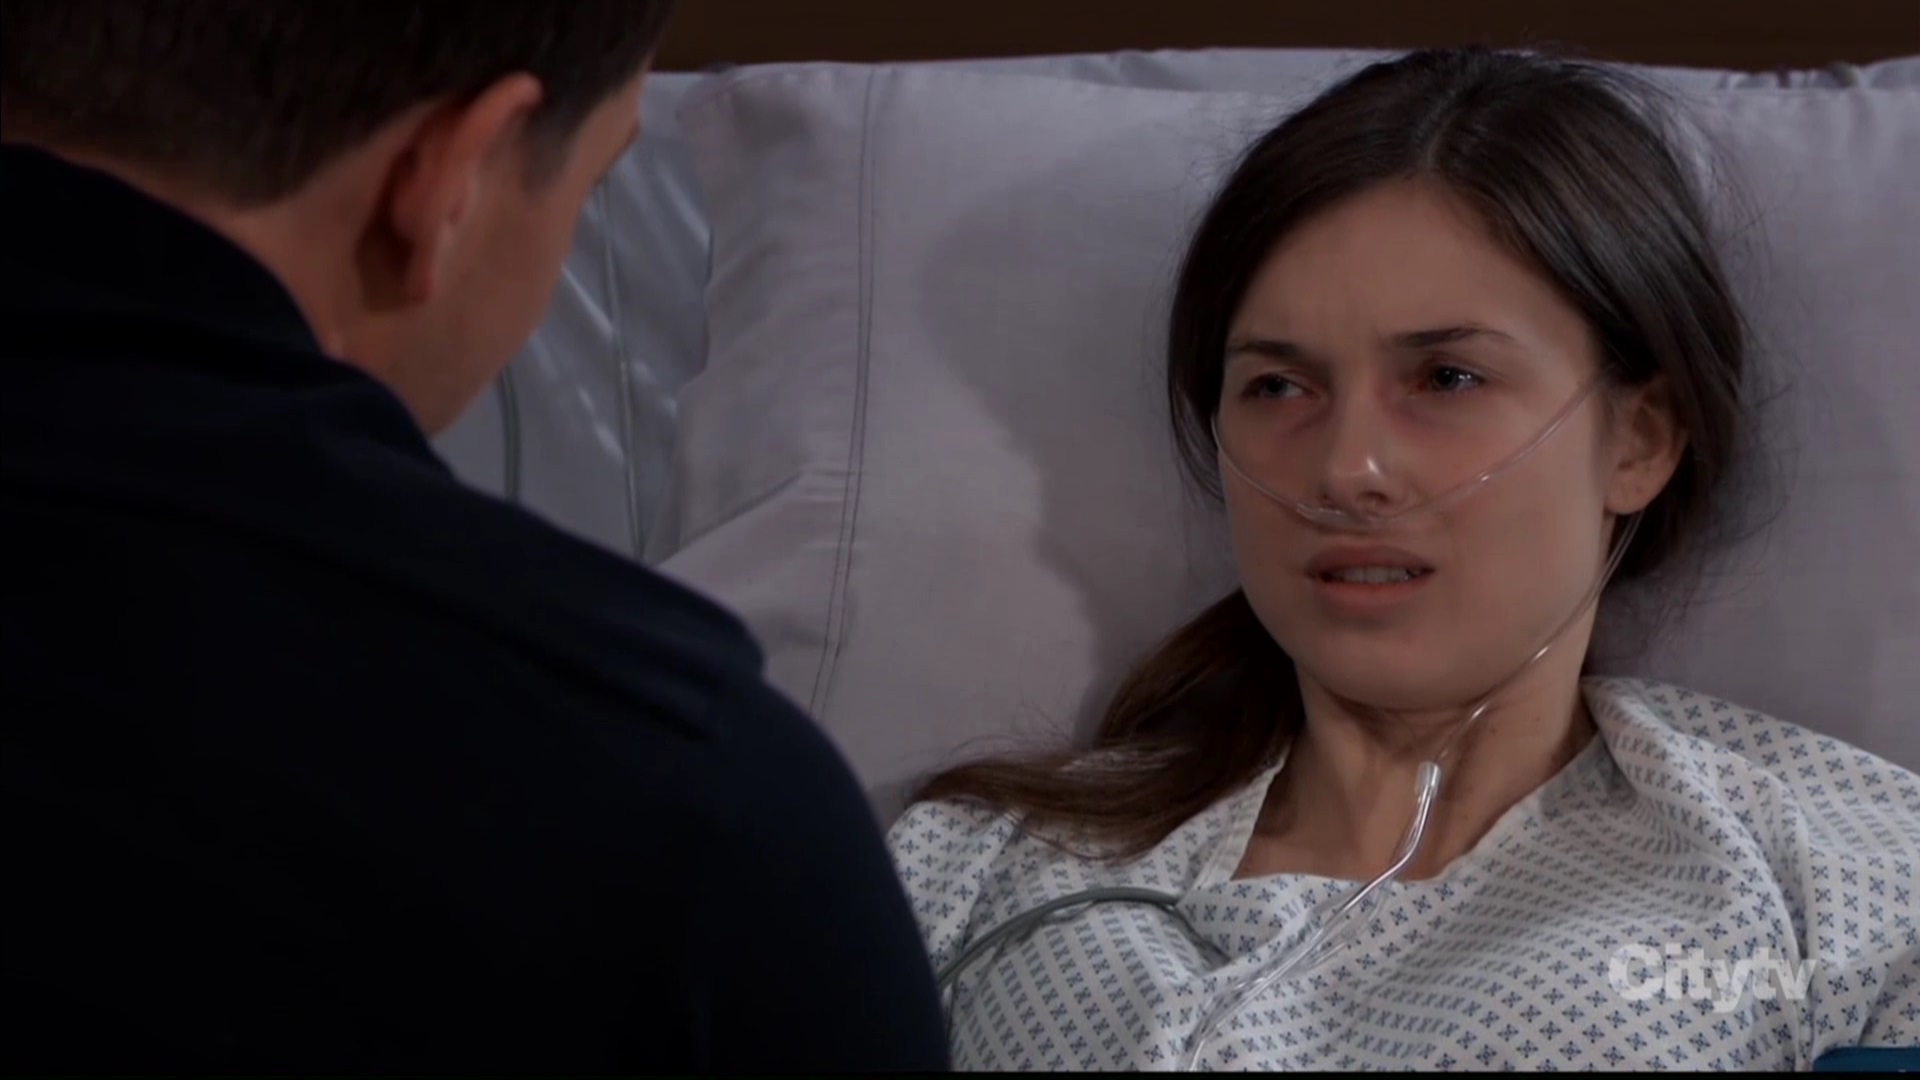 willow emotional in hospital